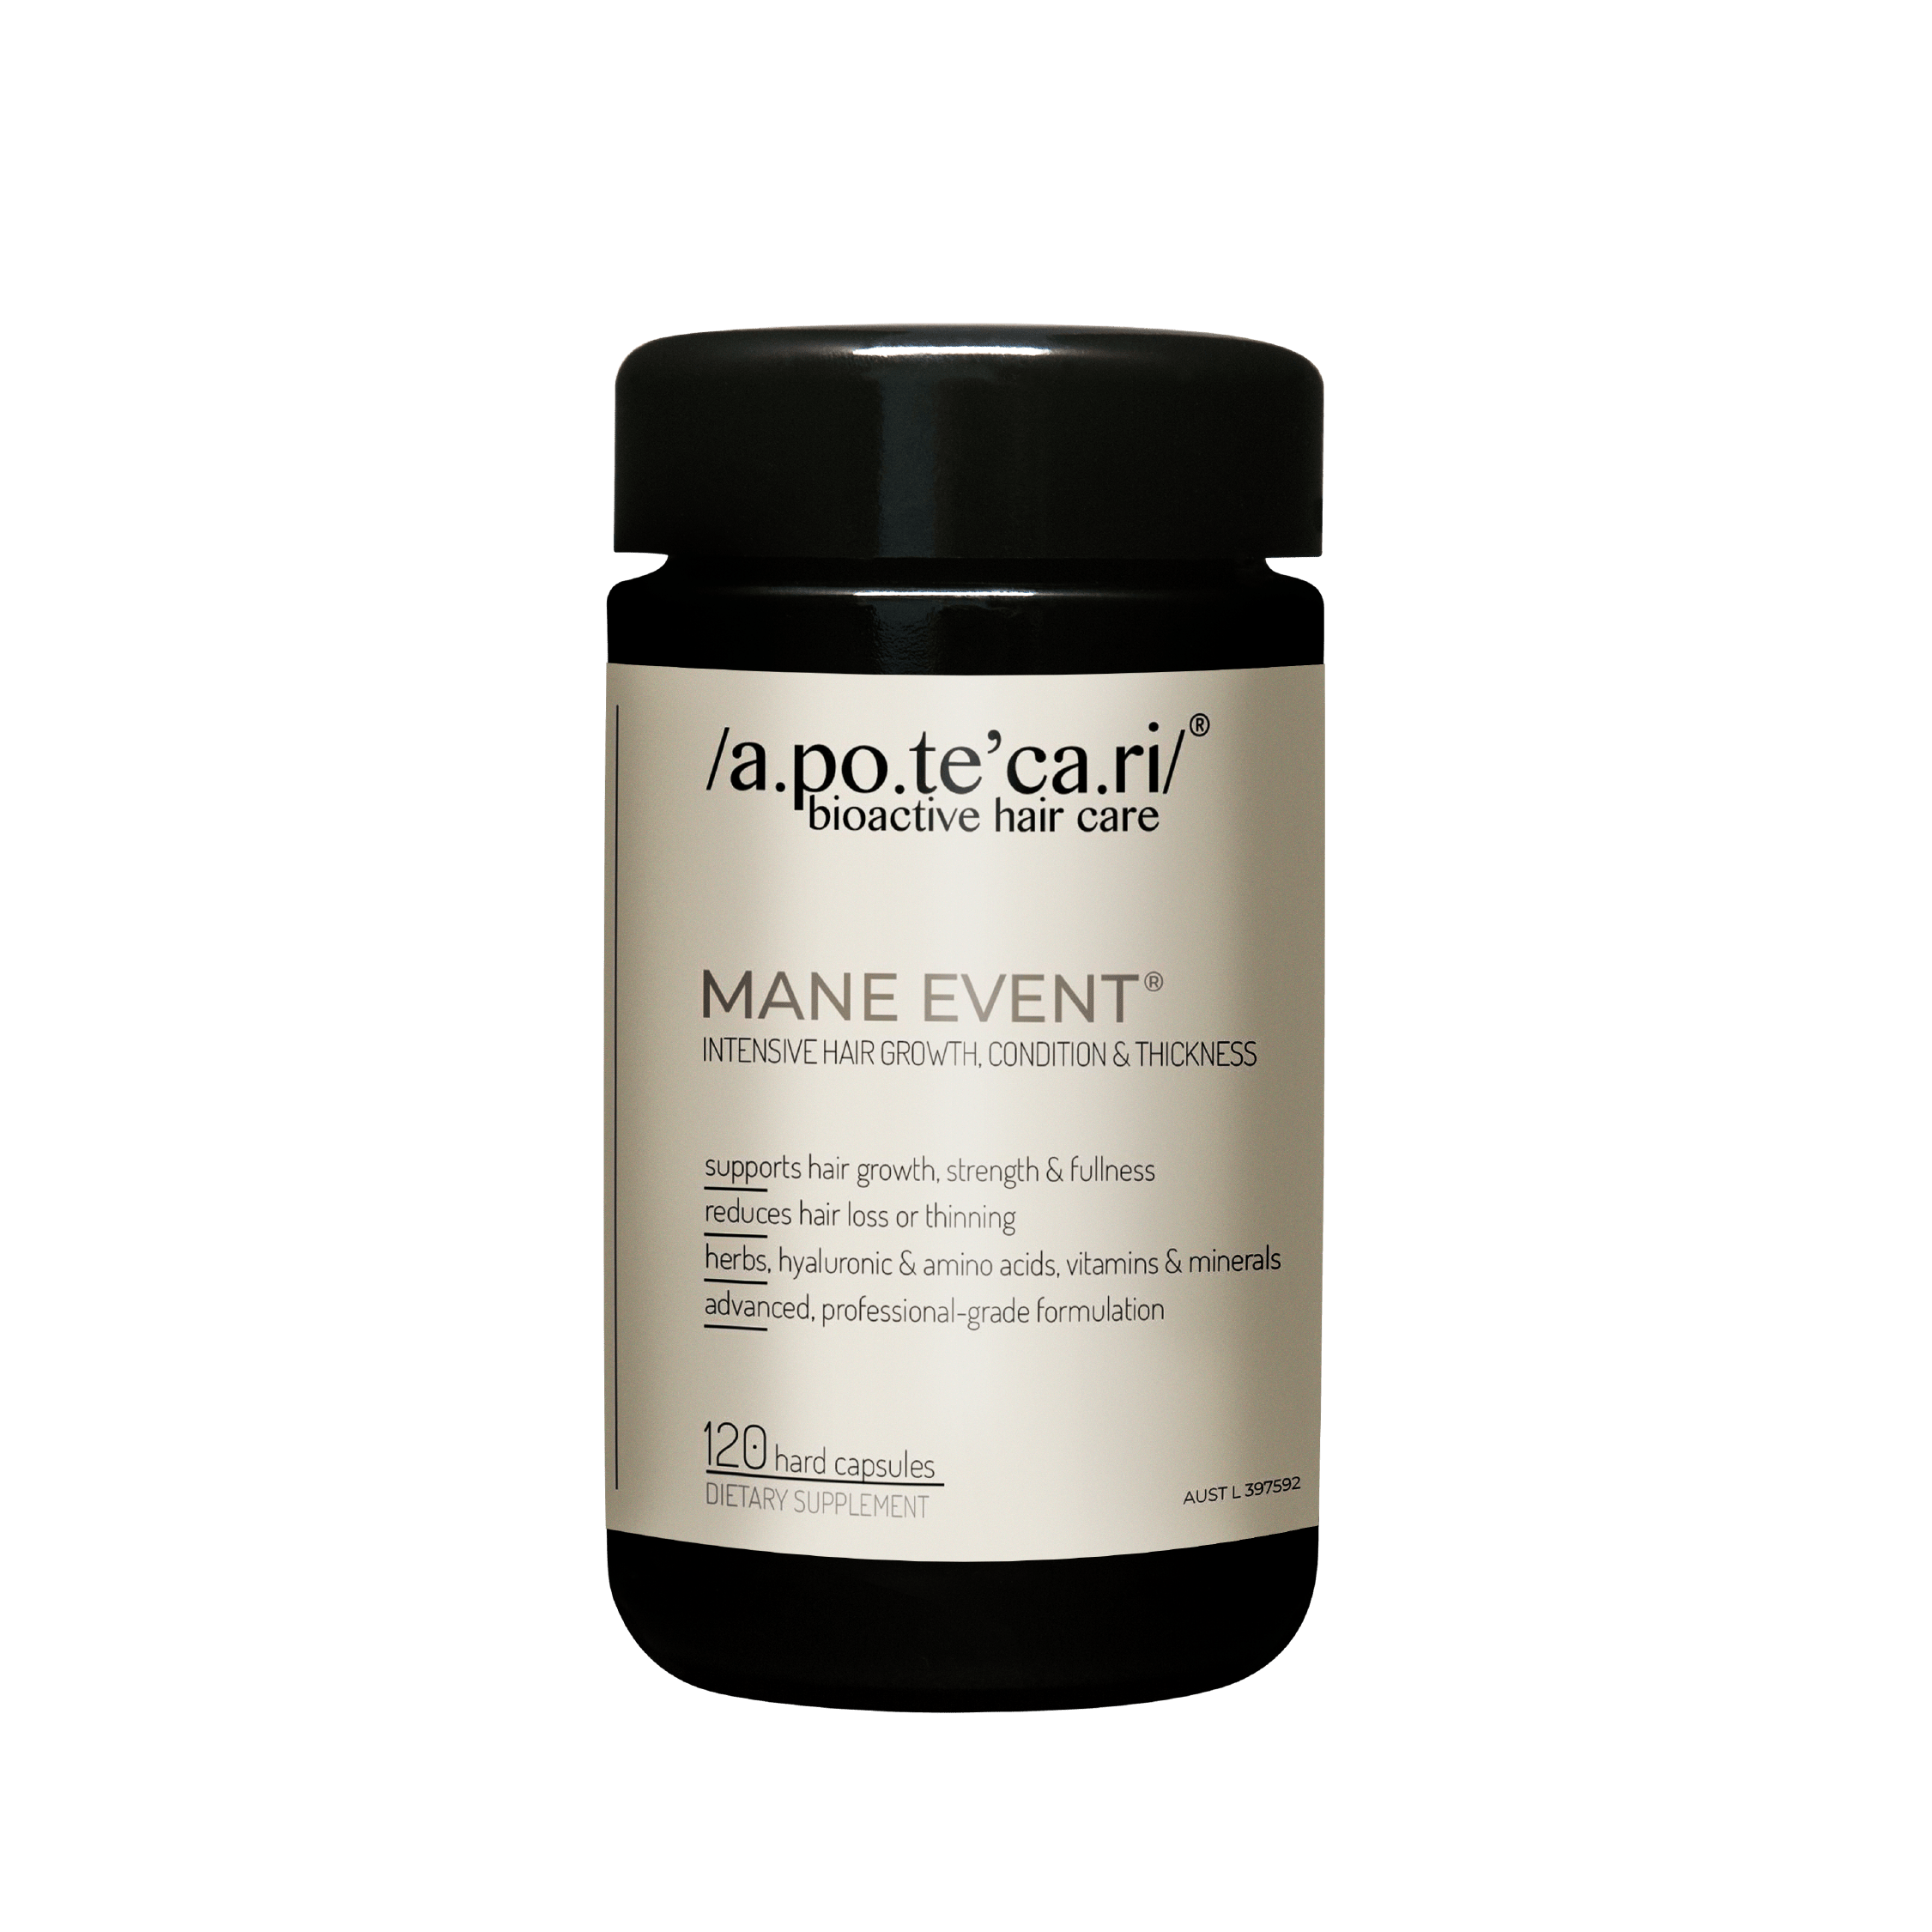 Apotecari Mane Event offers a supercharged boost for your hair - 120 hard capsules. 